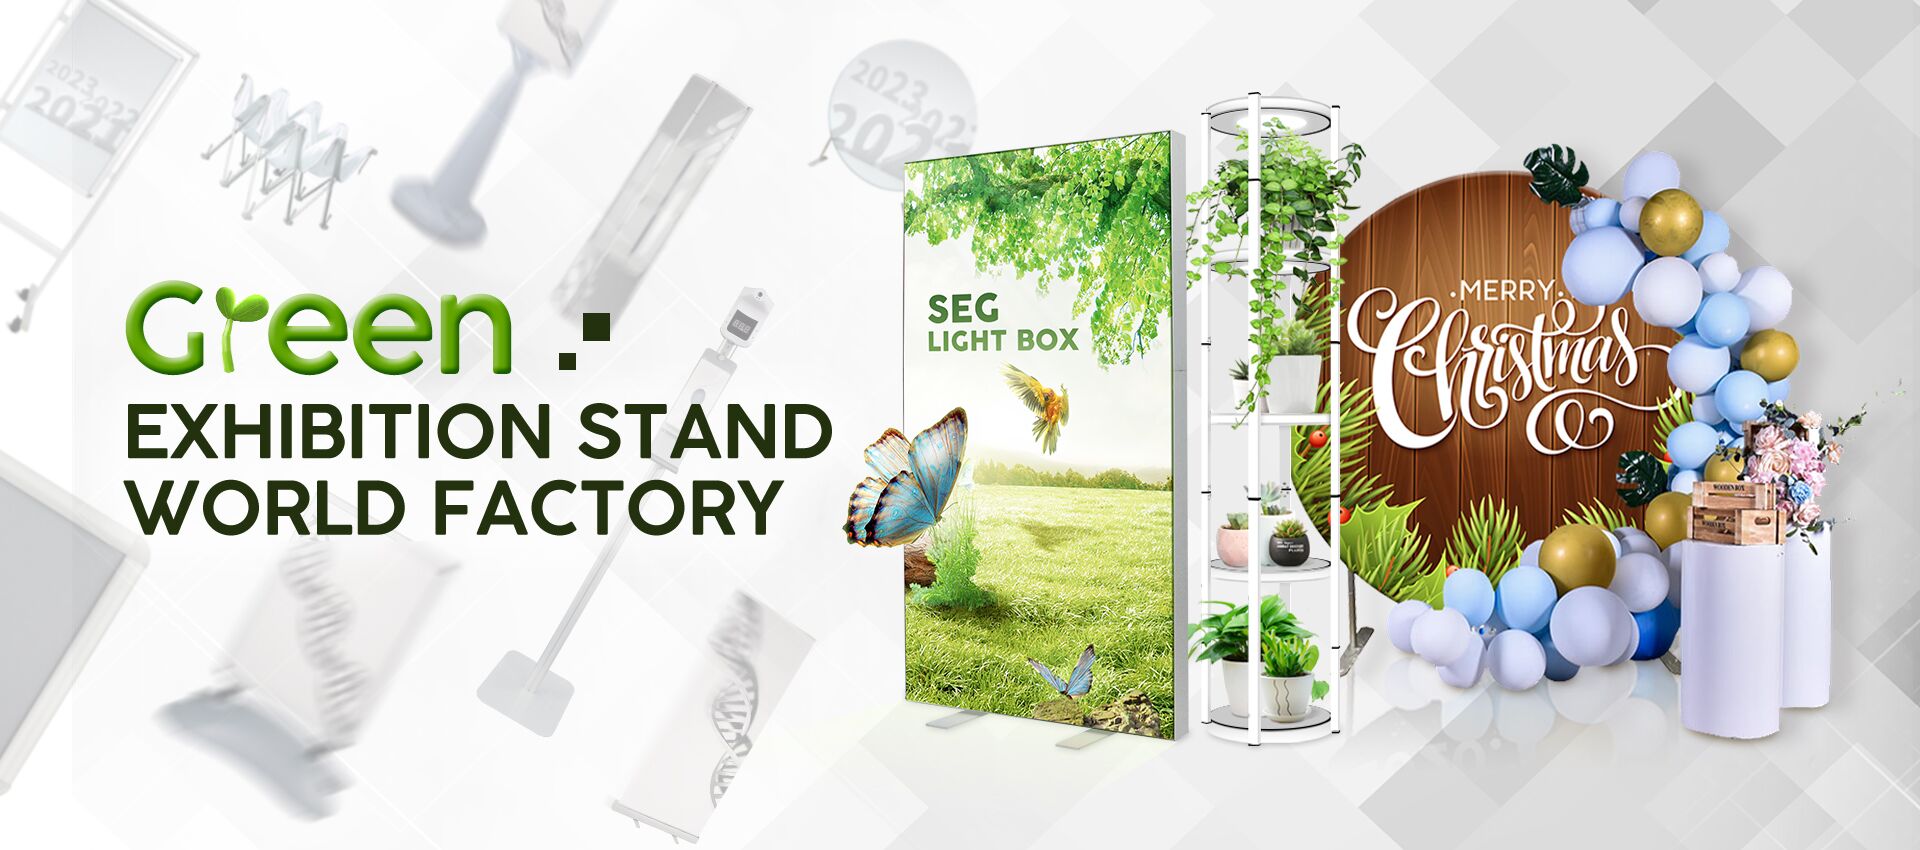 GREEN EXHIBITION STAND WORLD FACTORY